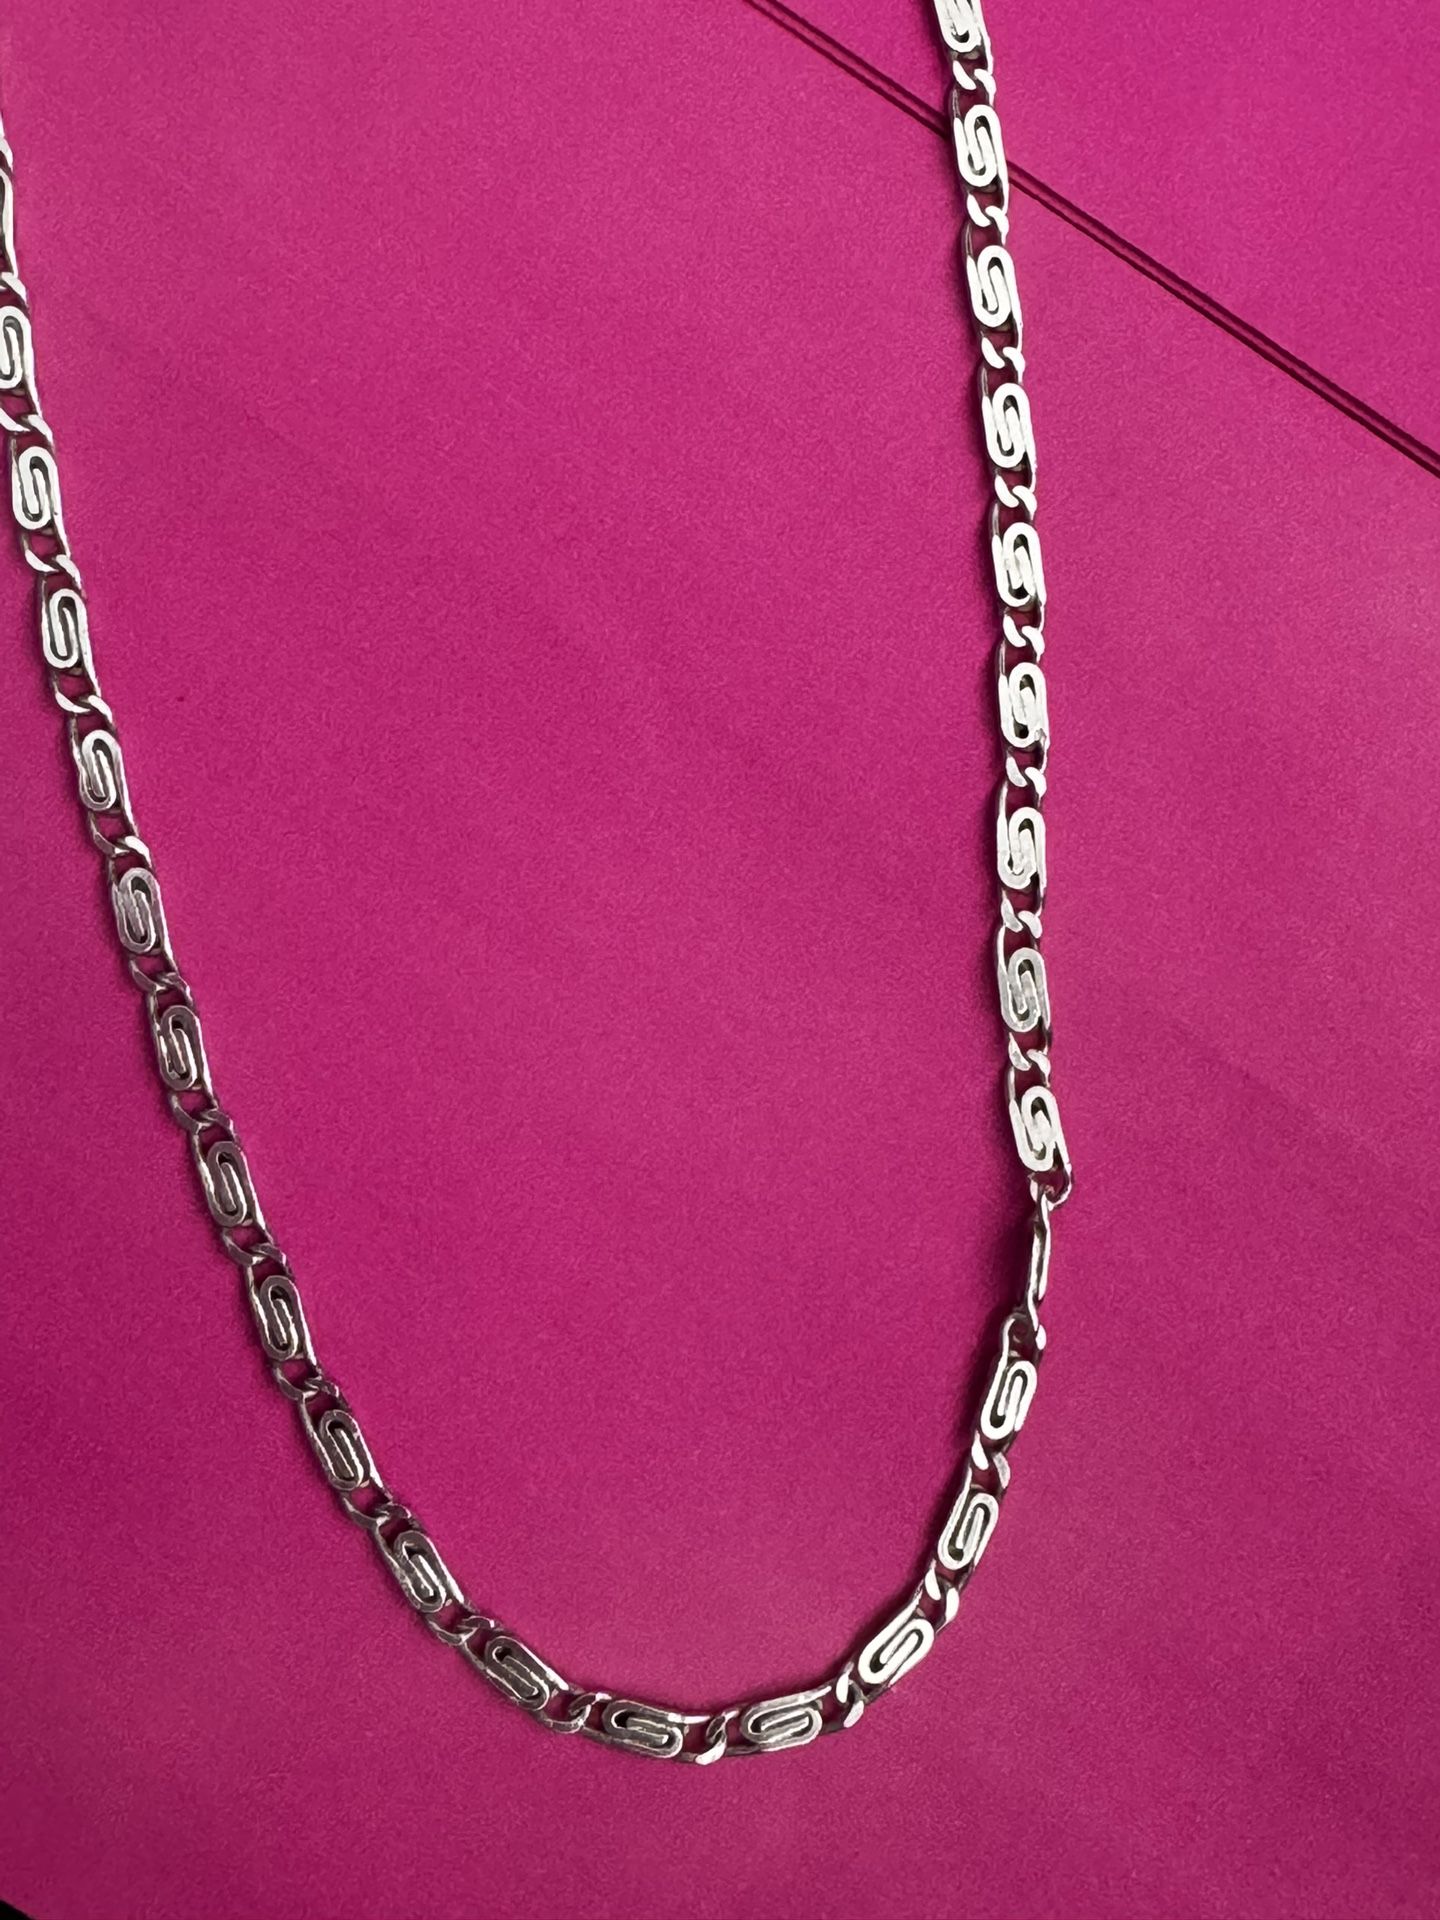 Vintage sterling silver 925 chain necklace  In great condition  16.43 grams  Approx 24 inches in length